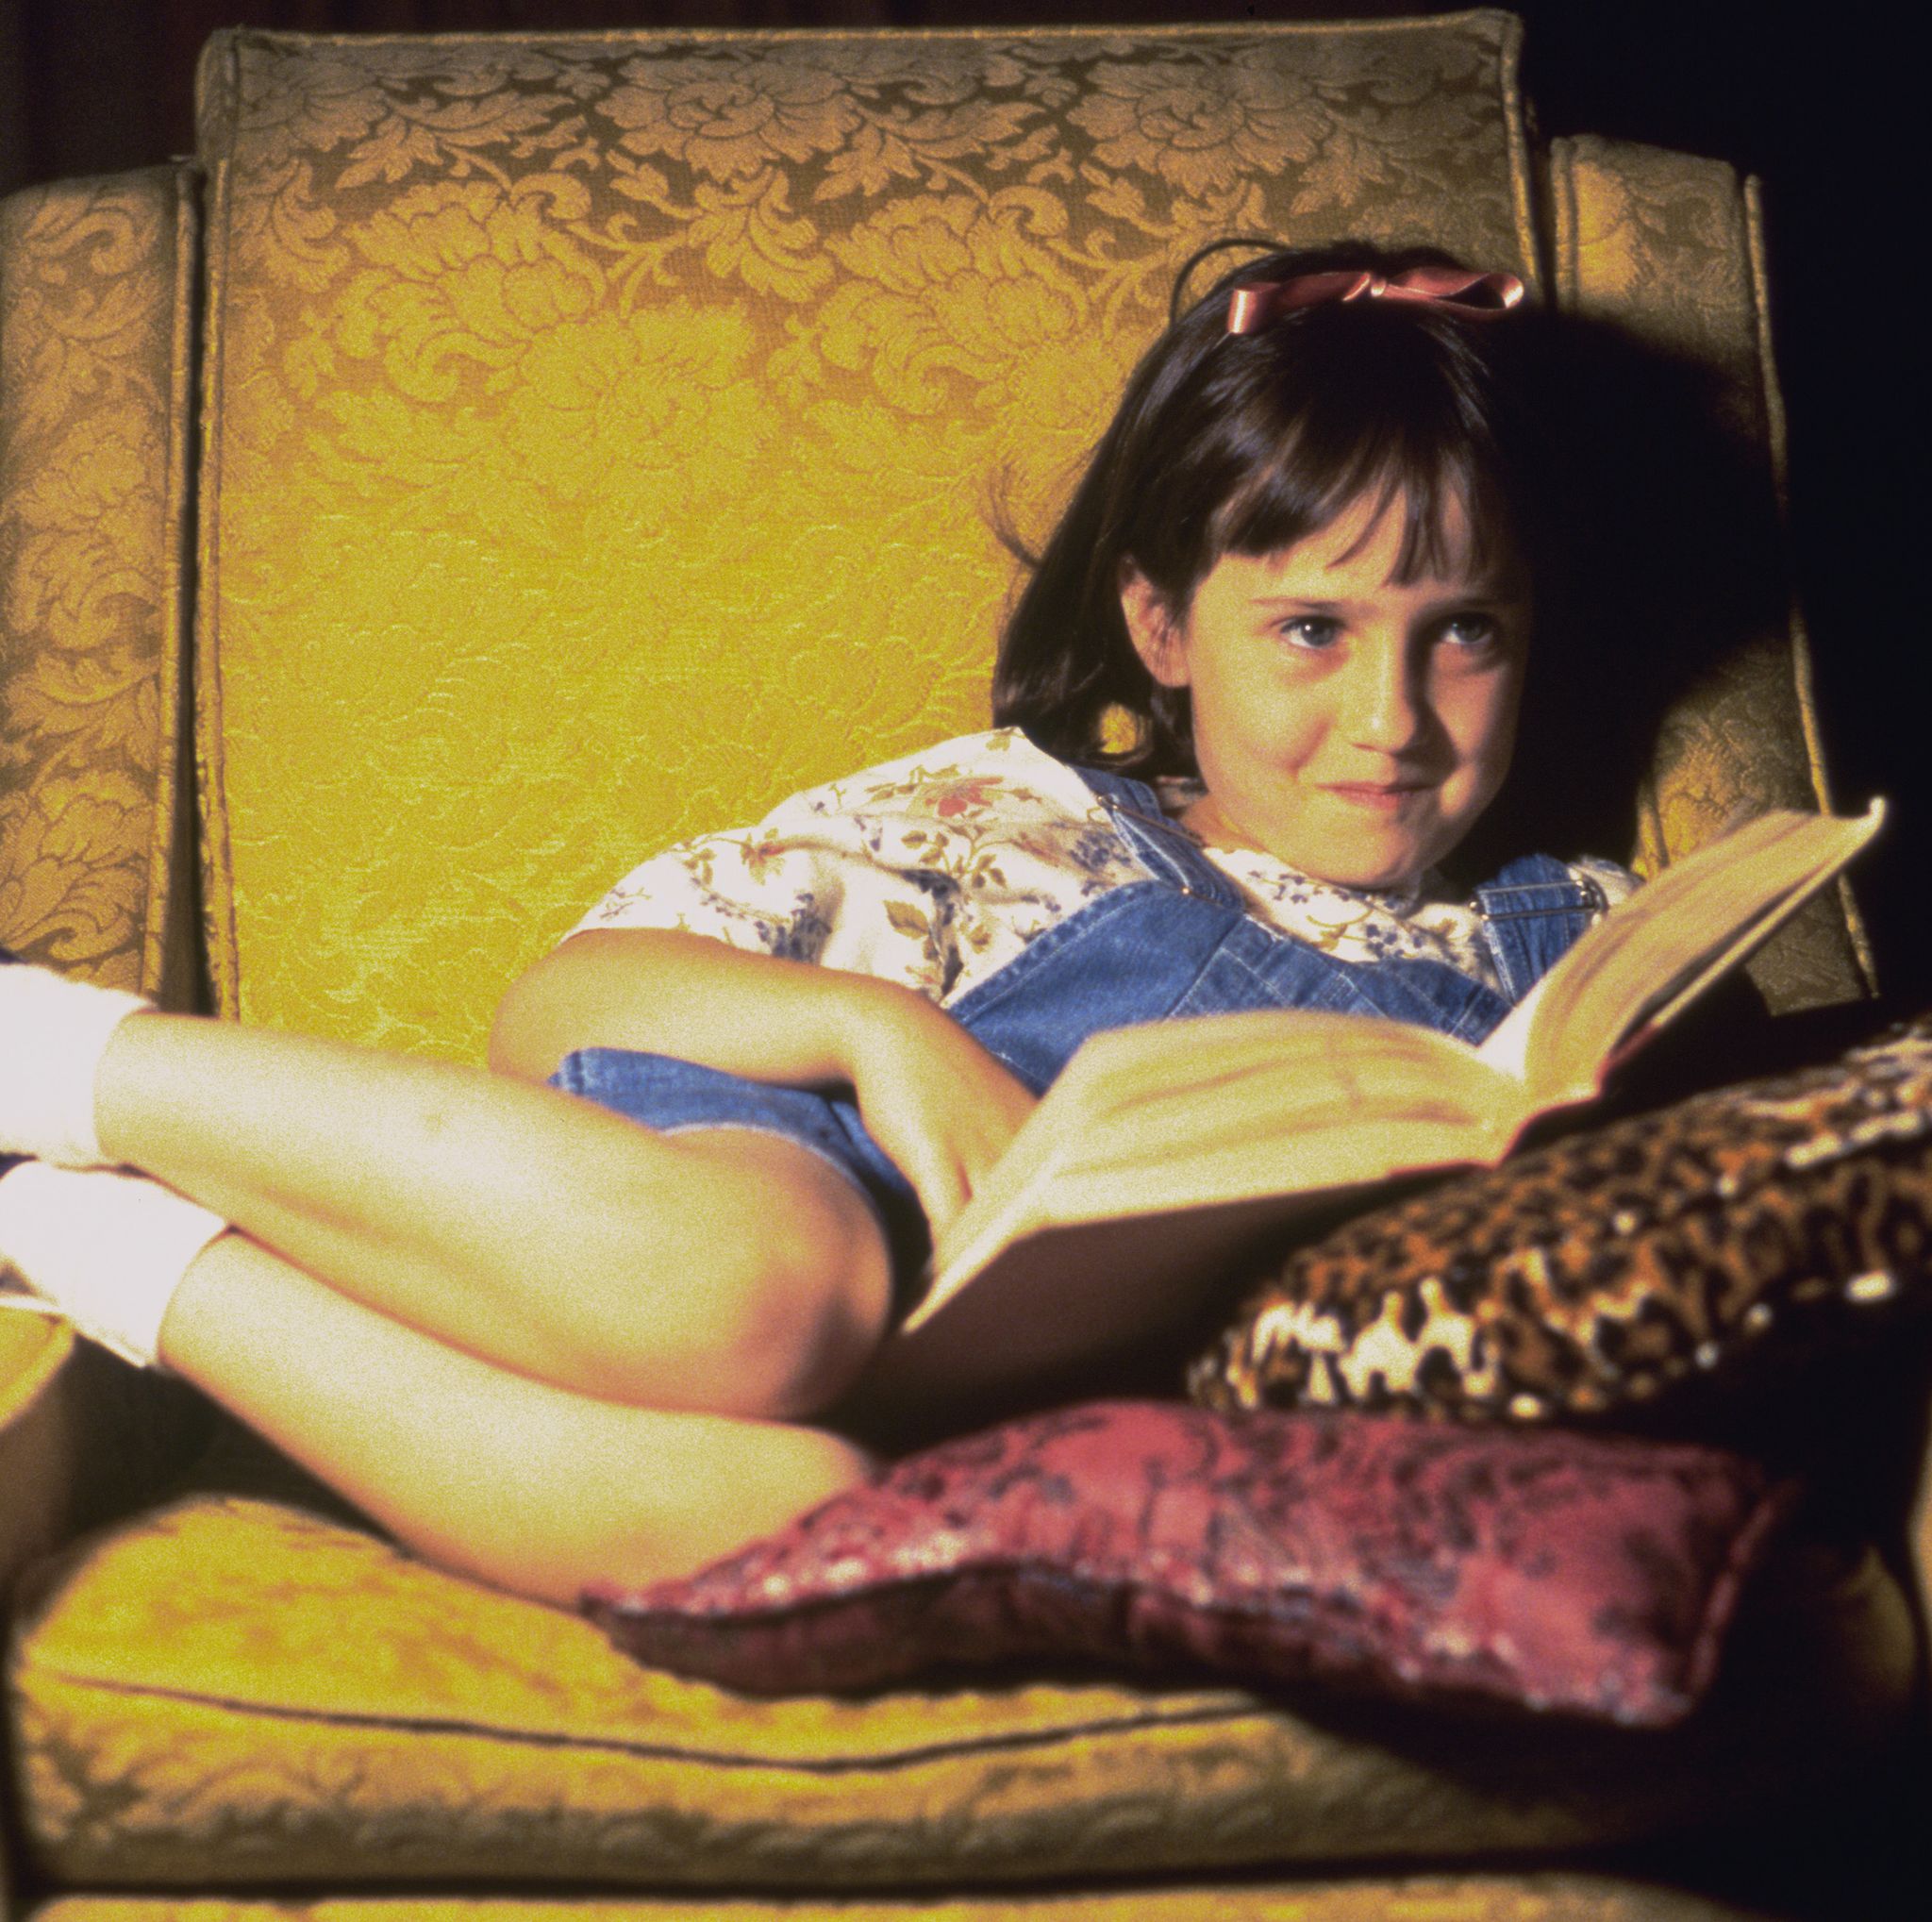 matilda   story of a wonderful little girl, who happens to be a genius, and her wonderful teacher vs the worst parents ever and the worst school principal imaginable